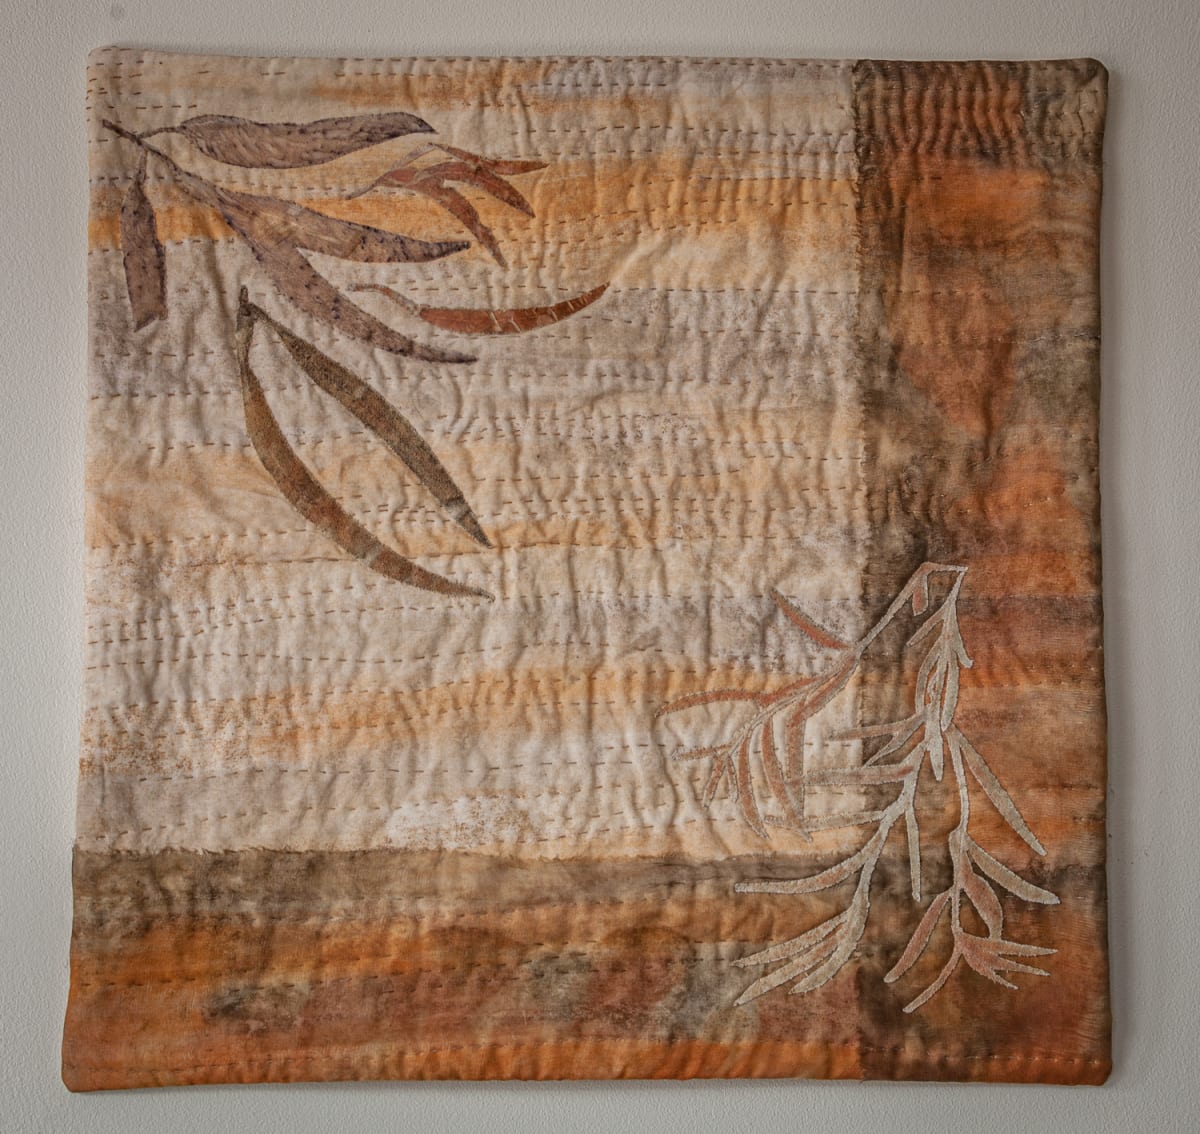 Windswept: Eco Colour Series #6 by Rasa Mauragis  Image: Created by painting with crushed rocks and soils and printed with local eucalyptus leaves 